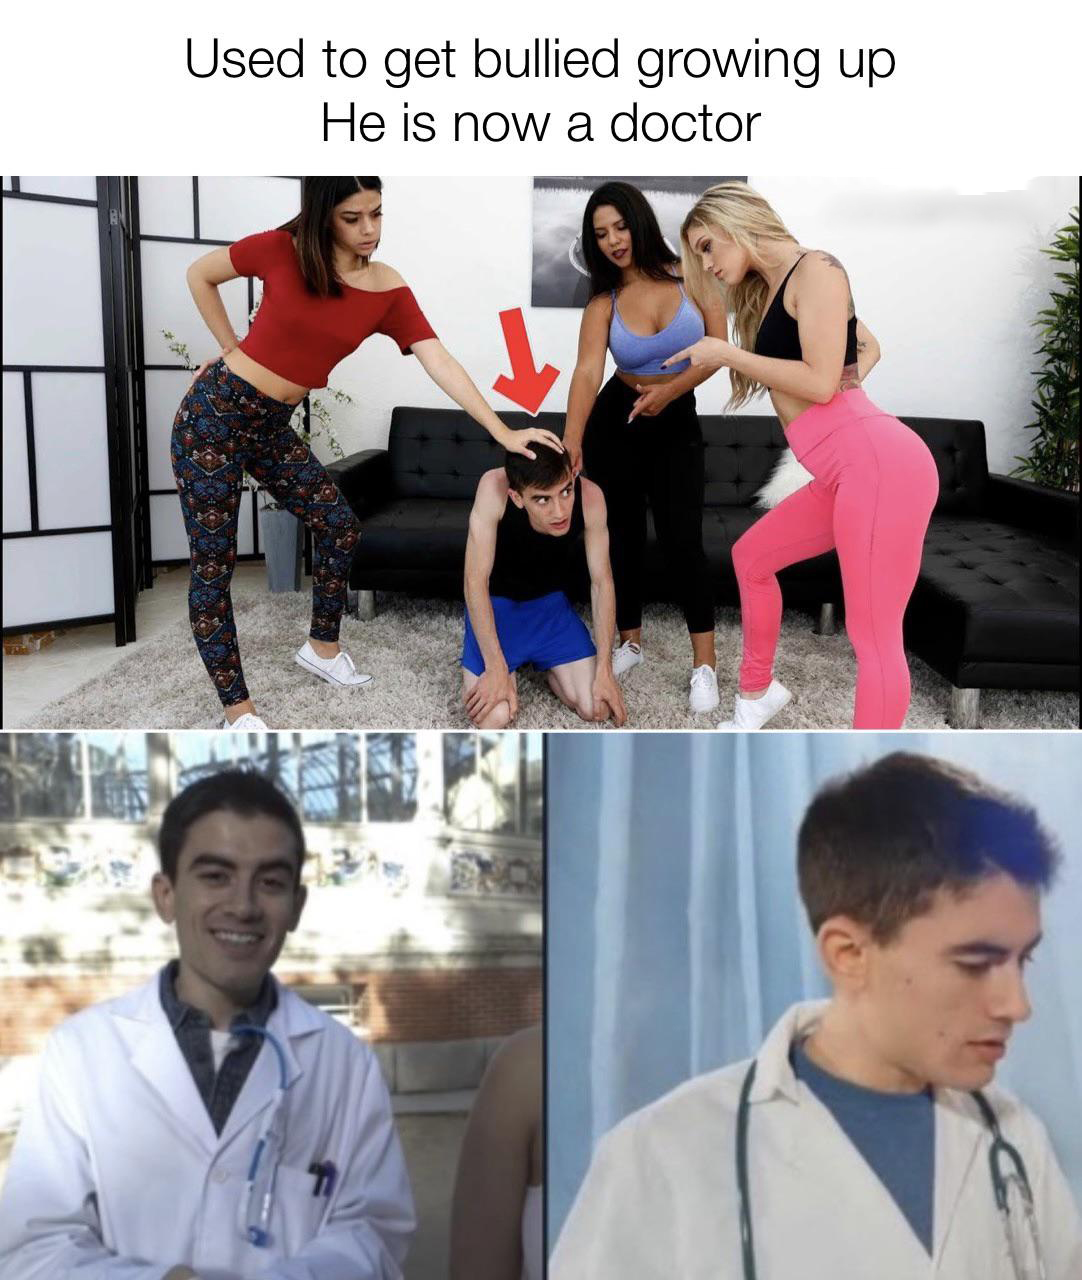 shoulder - Used to get bullied growing up He is now a doctor